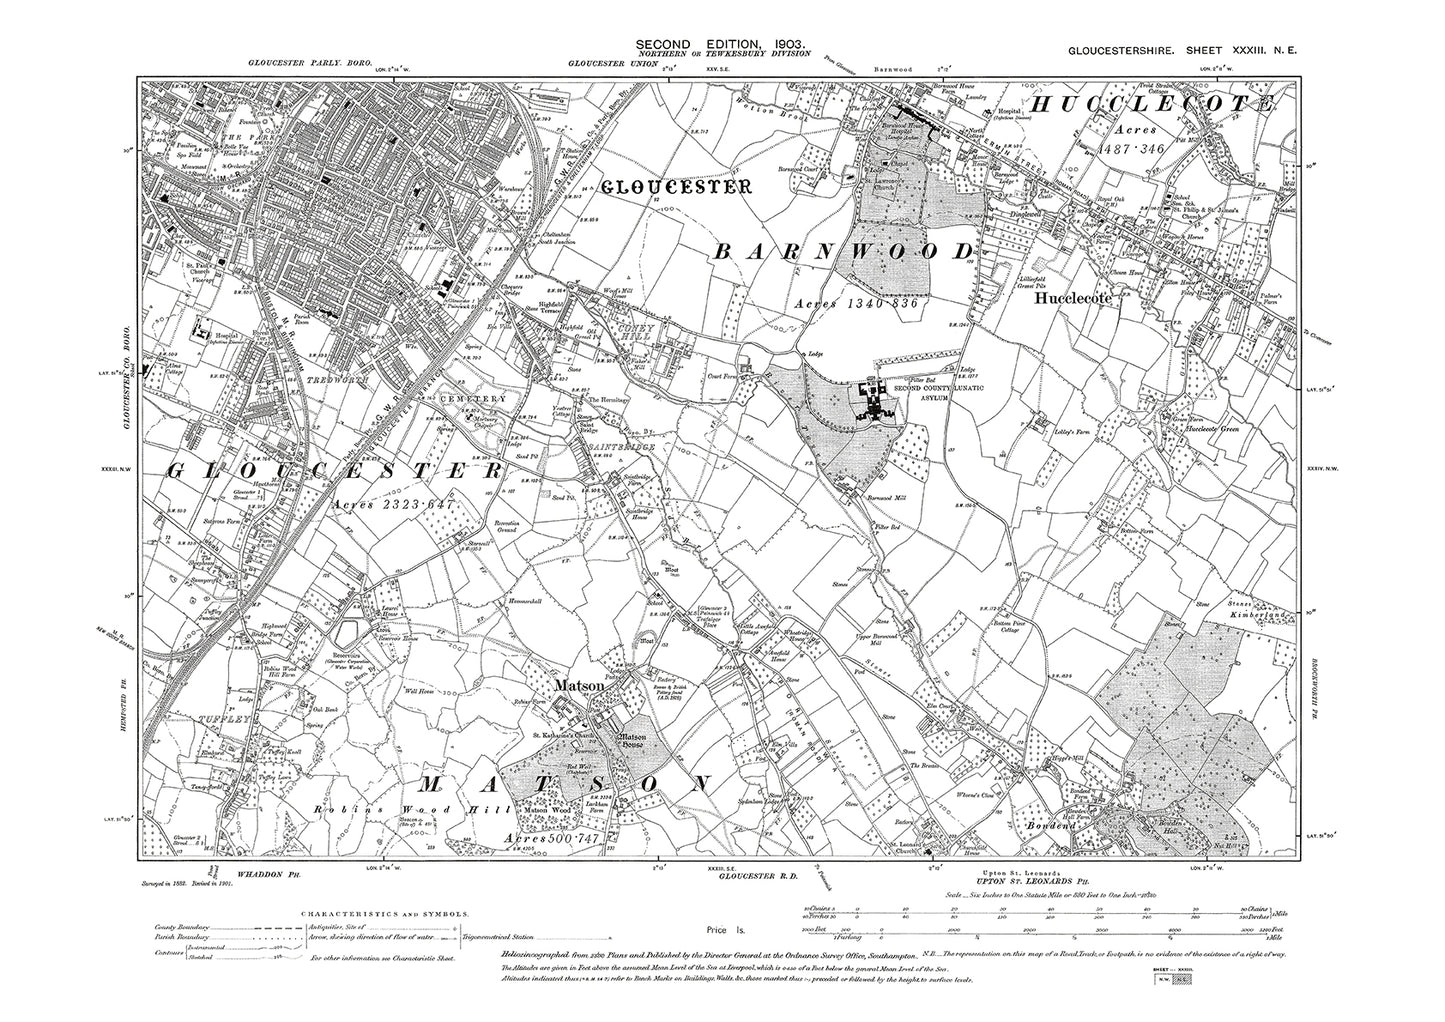 Old OS map dated 1903, showing Gloucester (southeast), Hucclecote, Matson in Gloucestershire - 33NE